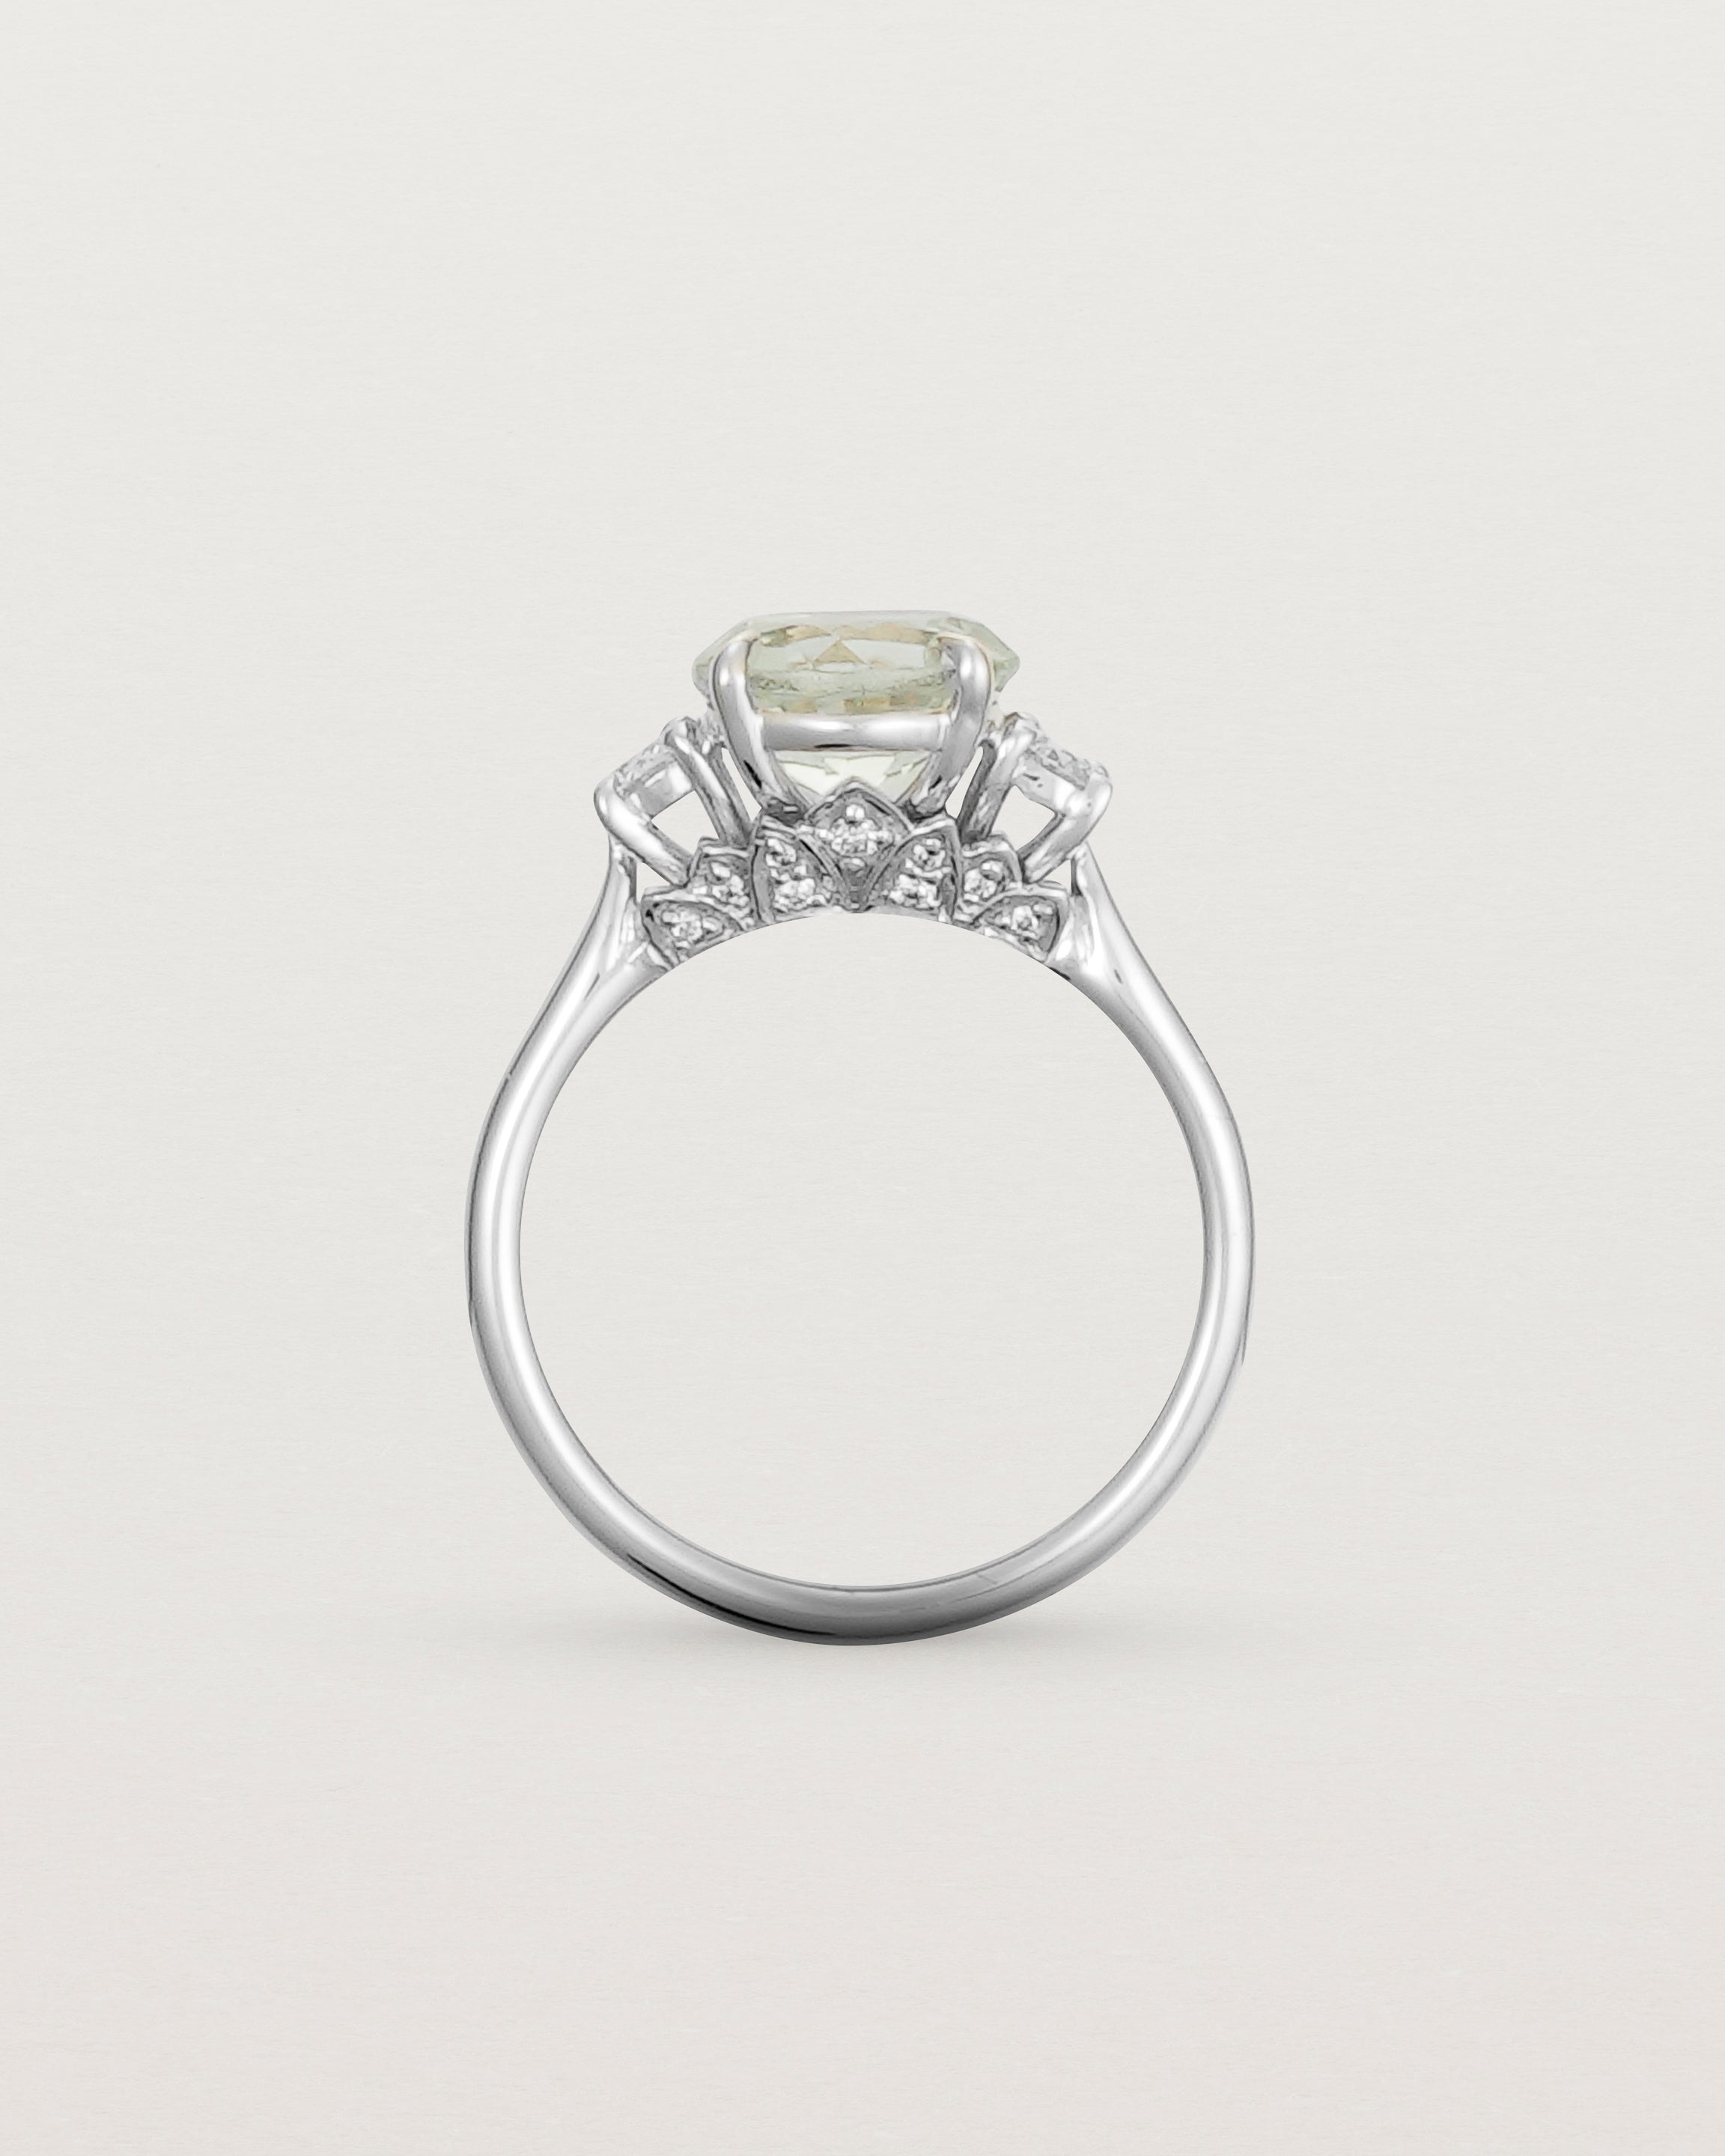 Standing view of the Laurel Round Trio Ring | Green Amethyst | White Gold.